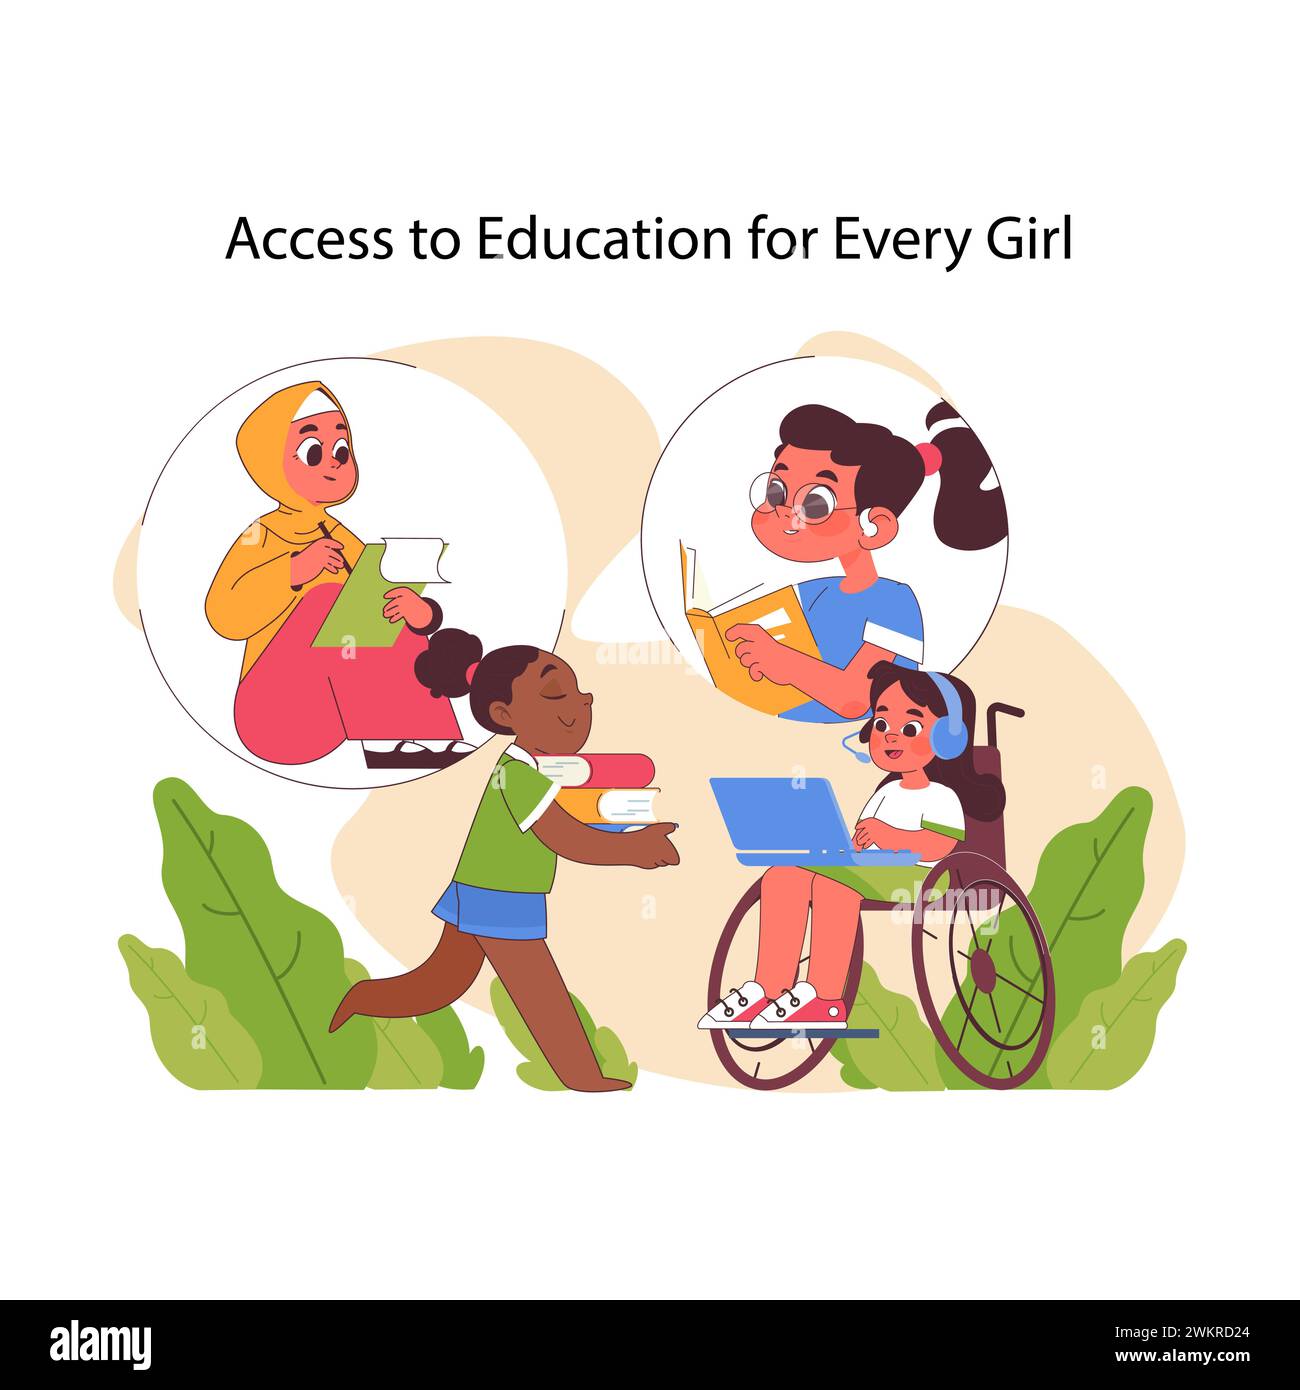 Access to education for every girl concept. Diverse girls studying, one in wheelchair with laptop, others reading and interacting. Inclusivity and equal opportunities. Flat vector illustration Stock Vector